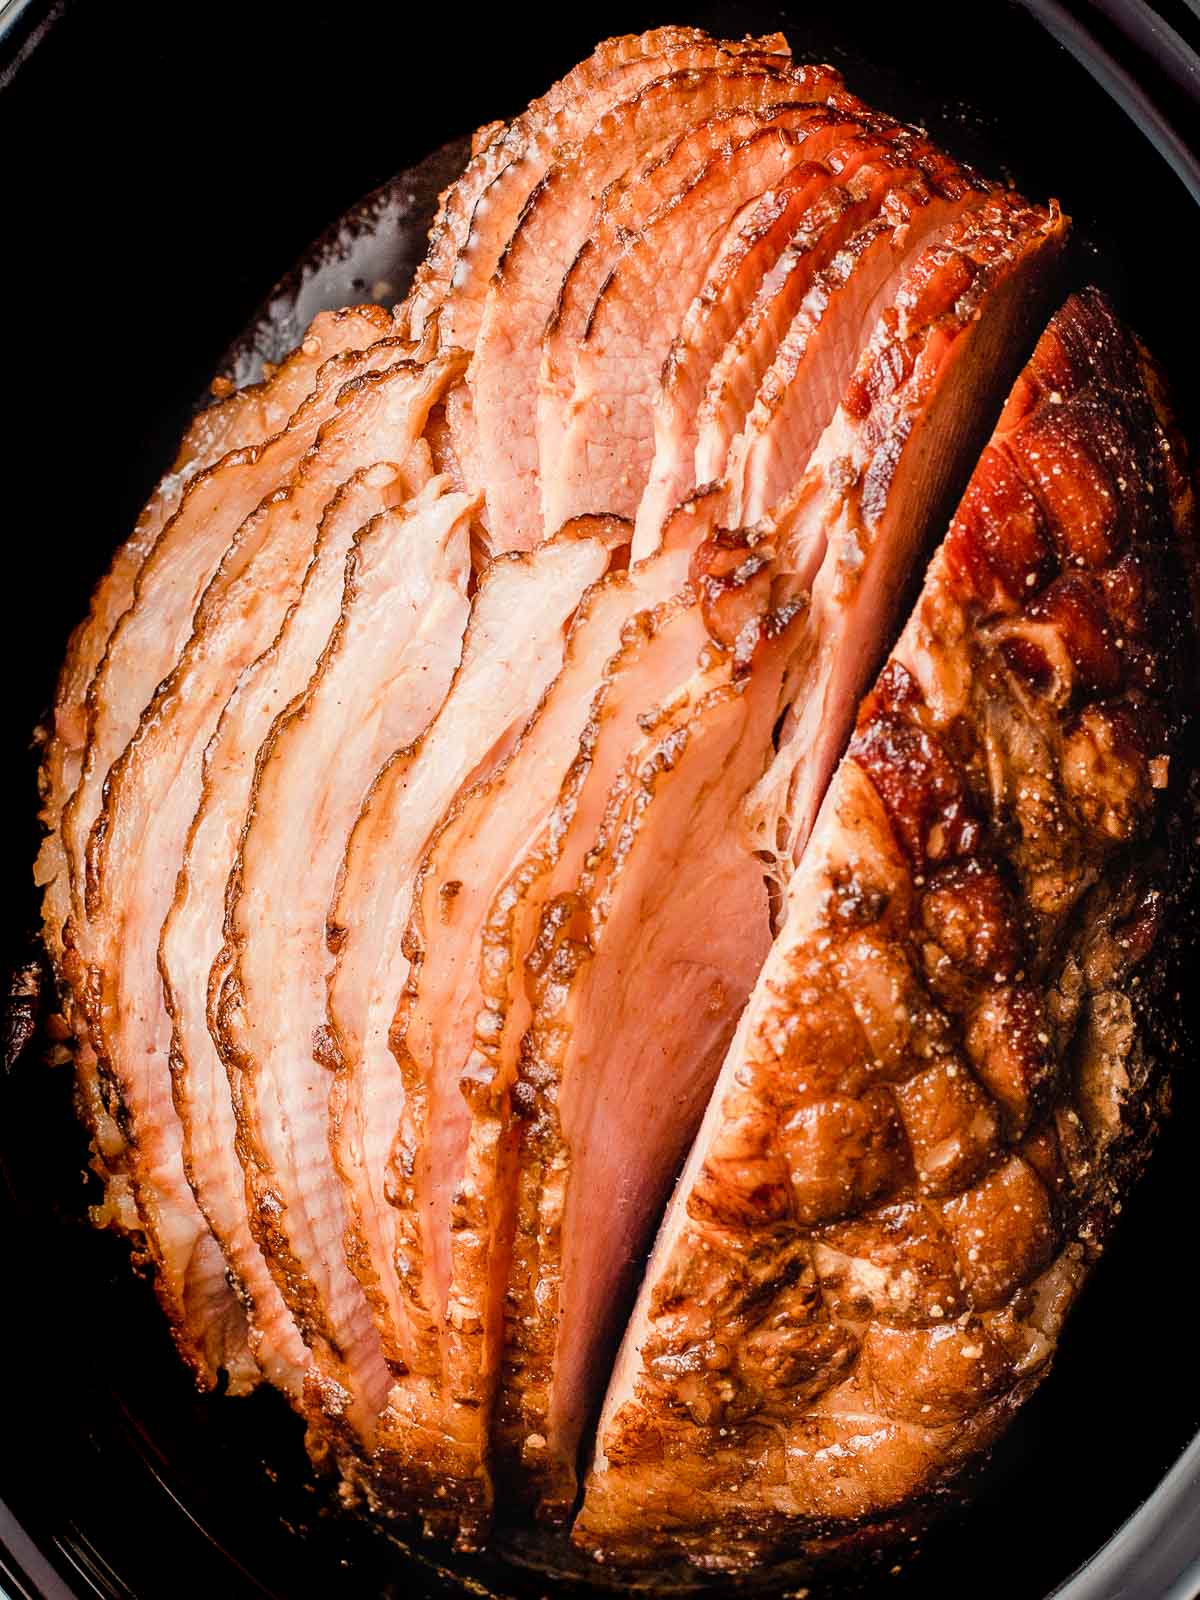 A spiral cut smoked ham in a slow cooker.